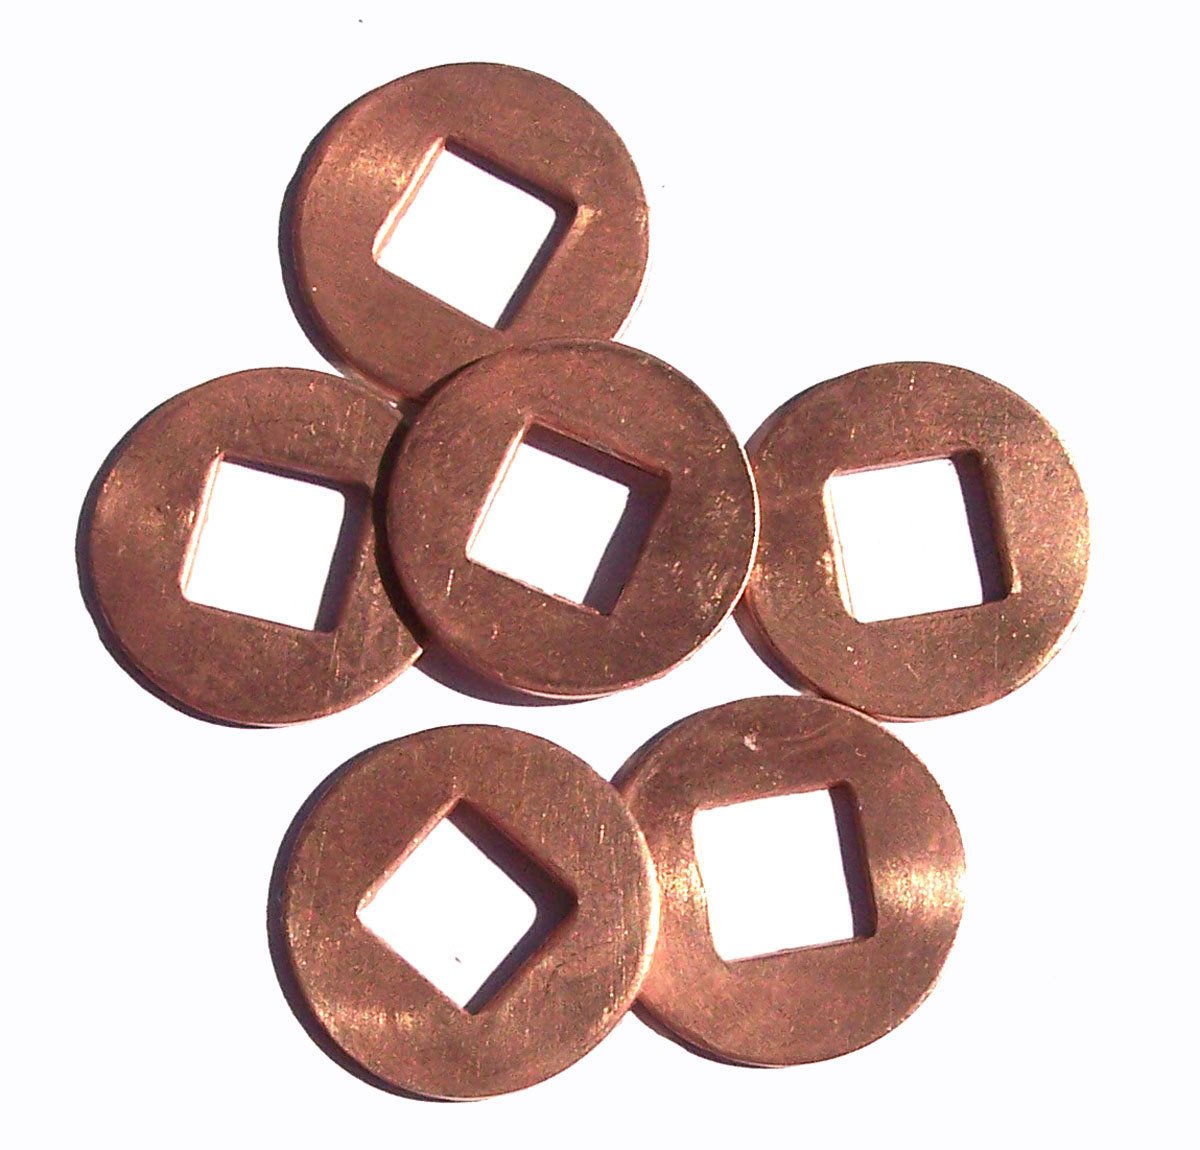 3/4 inch Copper Donut Washer 20mm Cutout for Enameling Stamping Texturing Blanks, Jewelry Supplies 20G